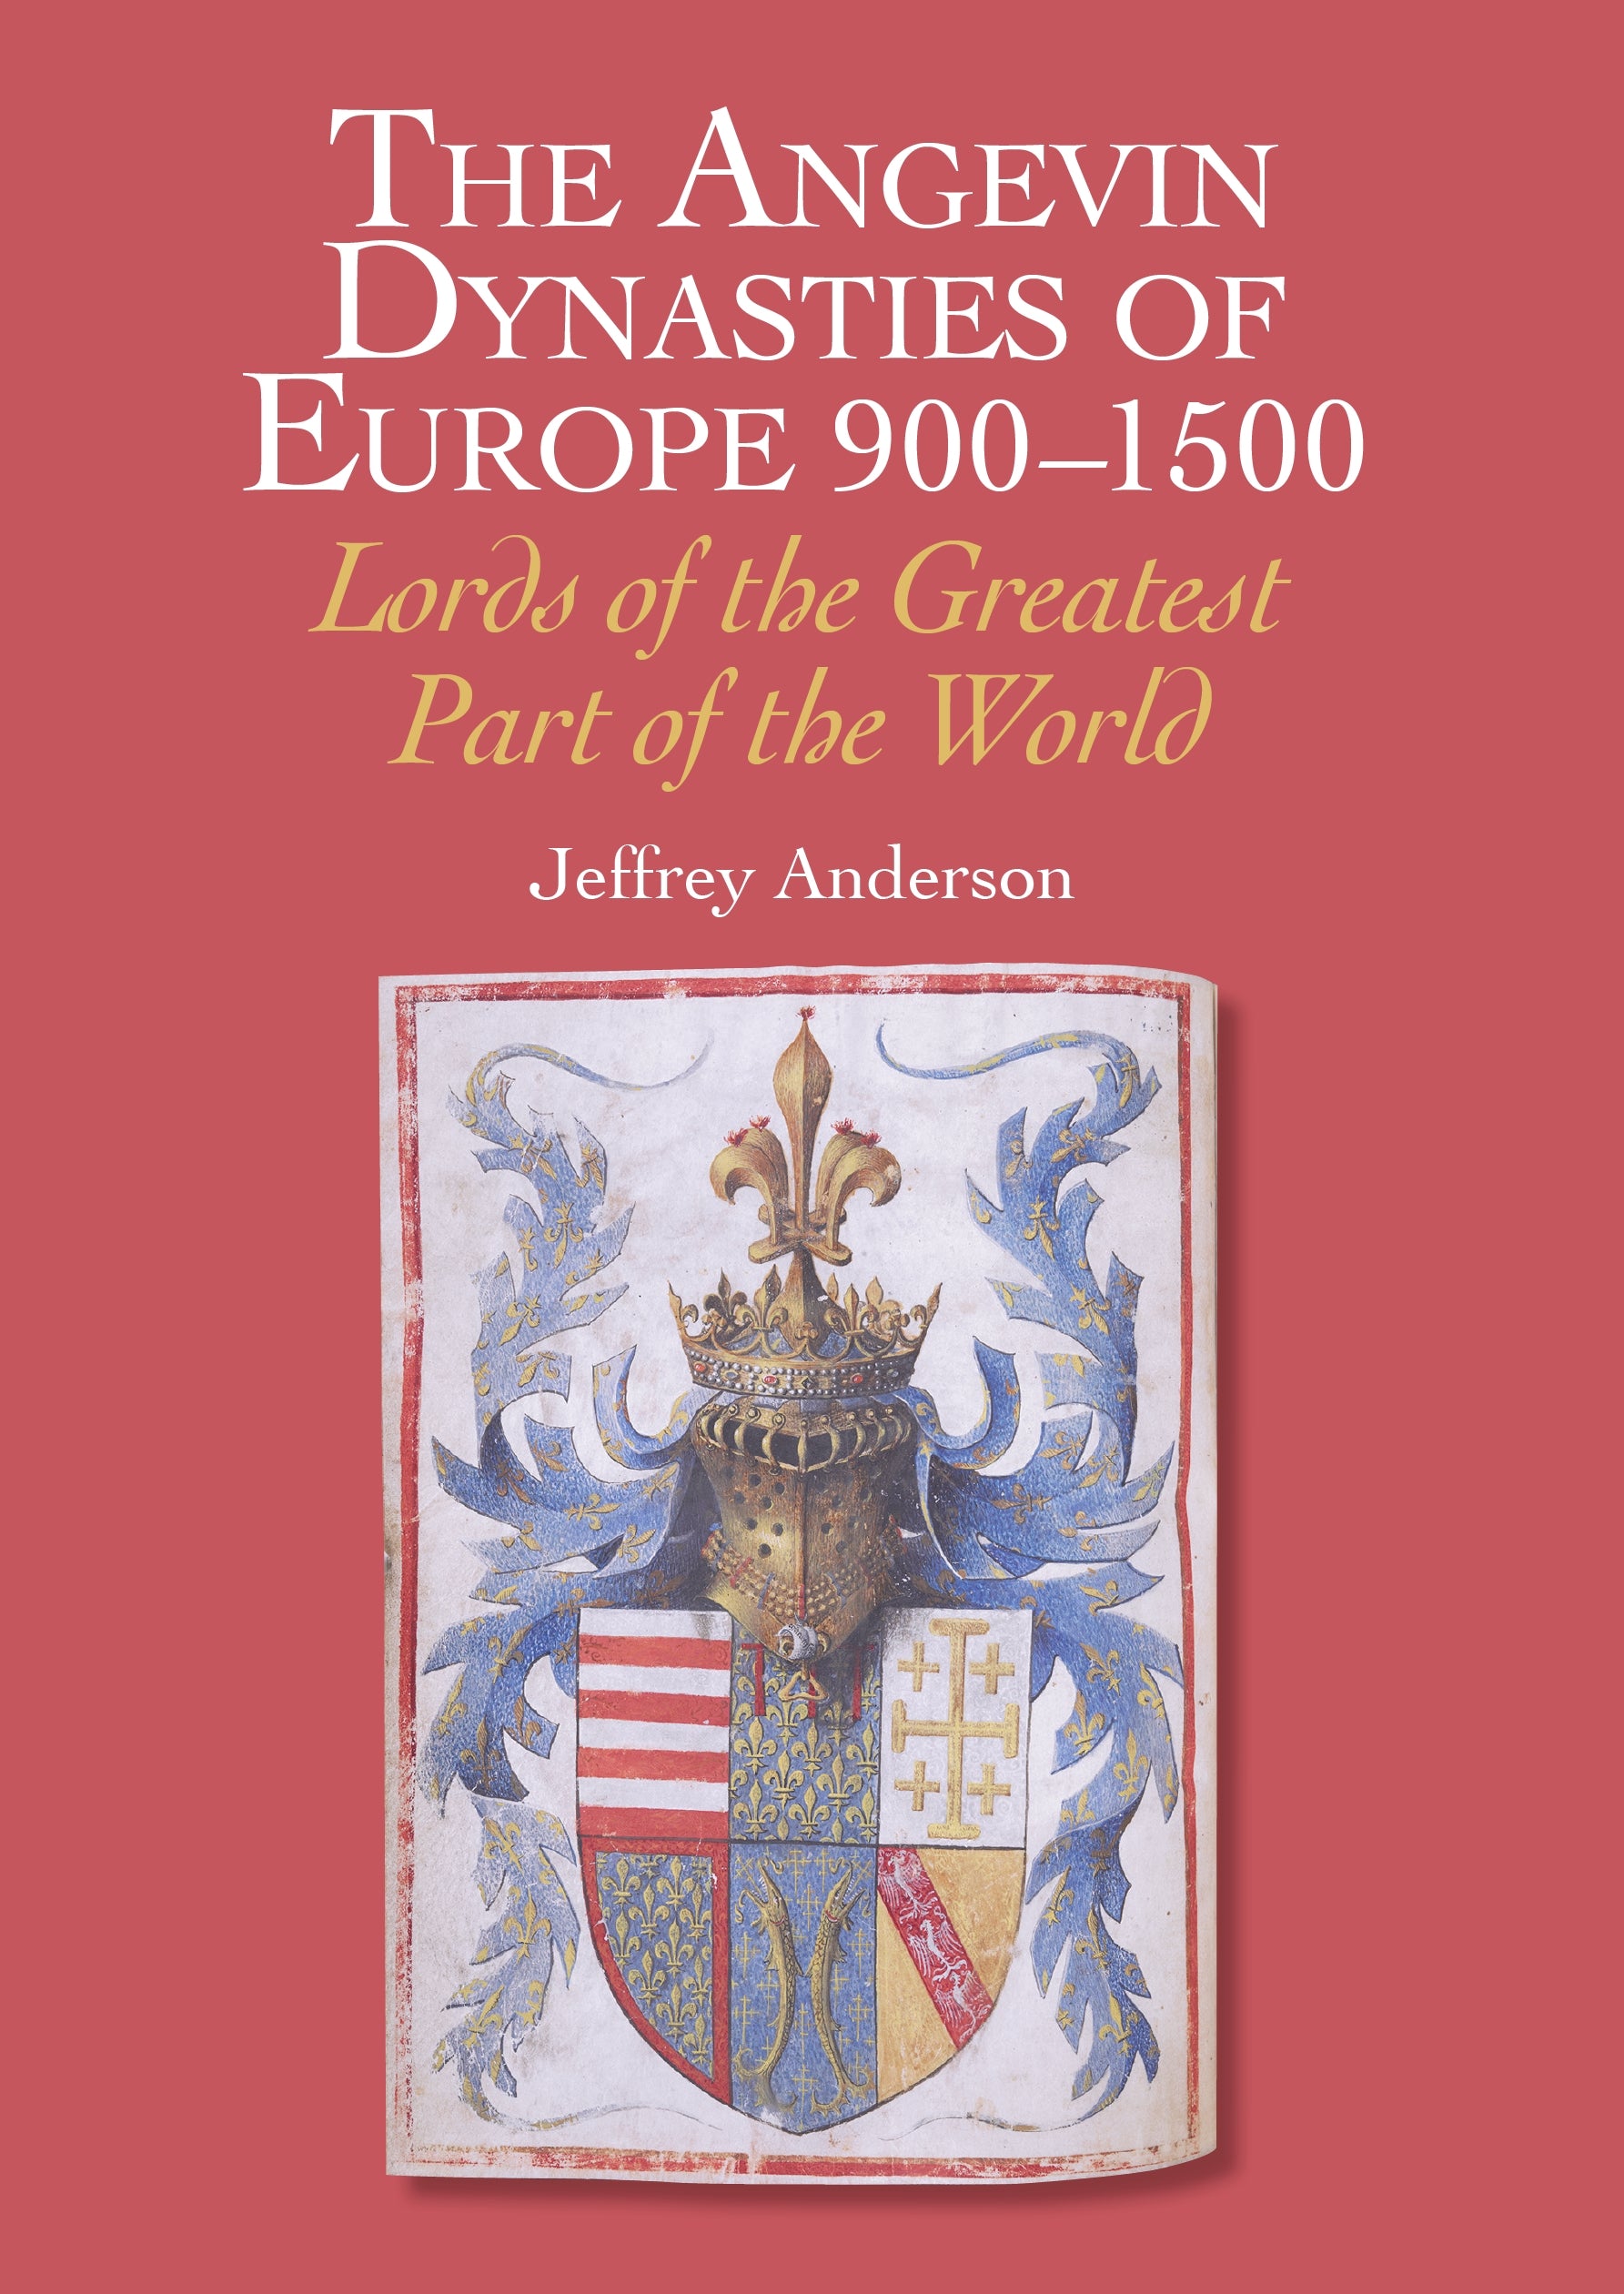 The Angevin Dynasties of Europe 900-1500